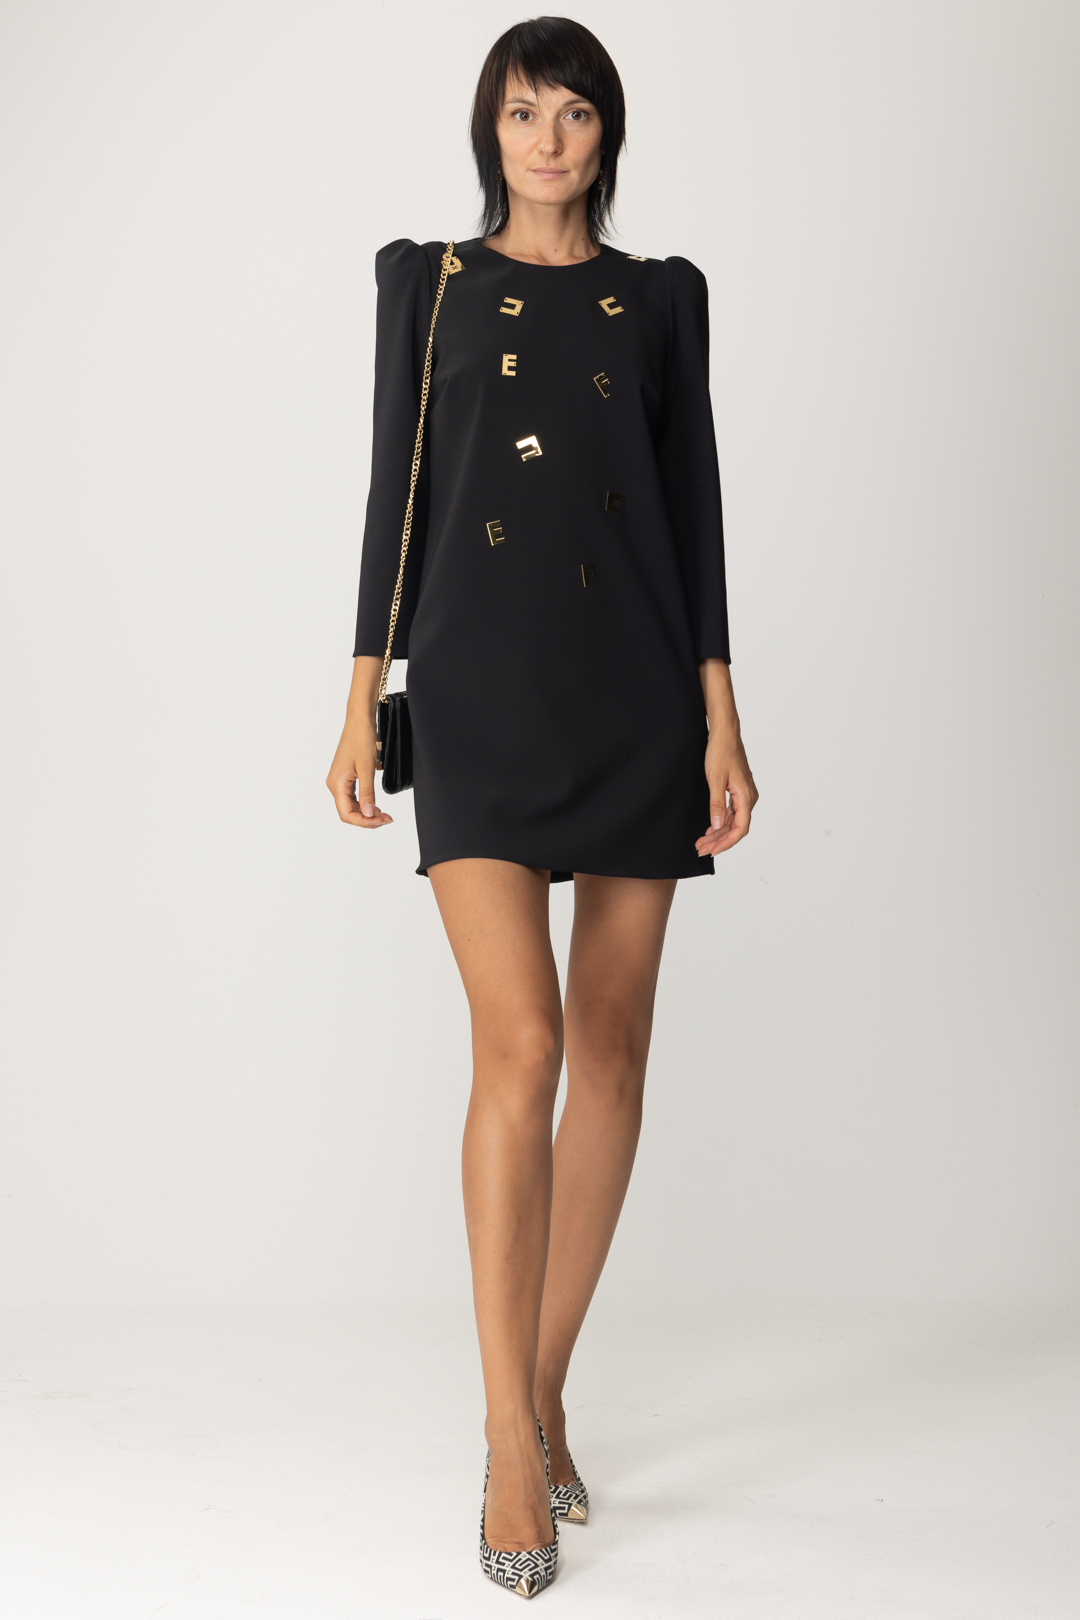 Preview: Elisabetta Franchi Boxy minidress with lettering Nero